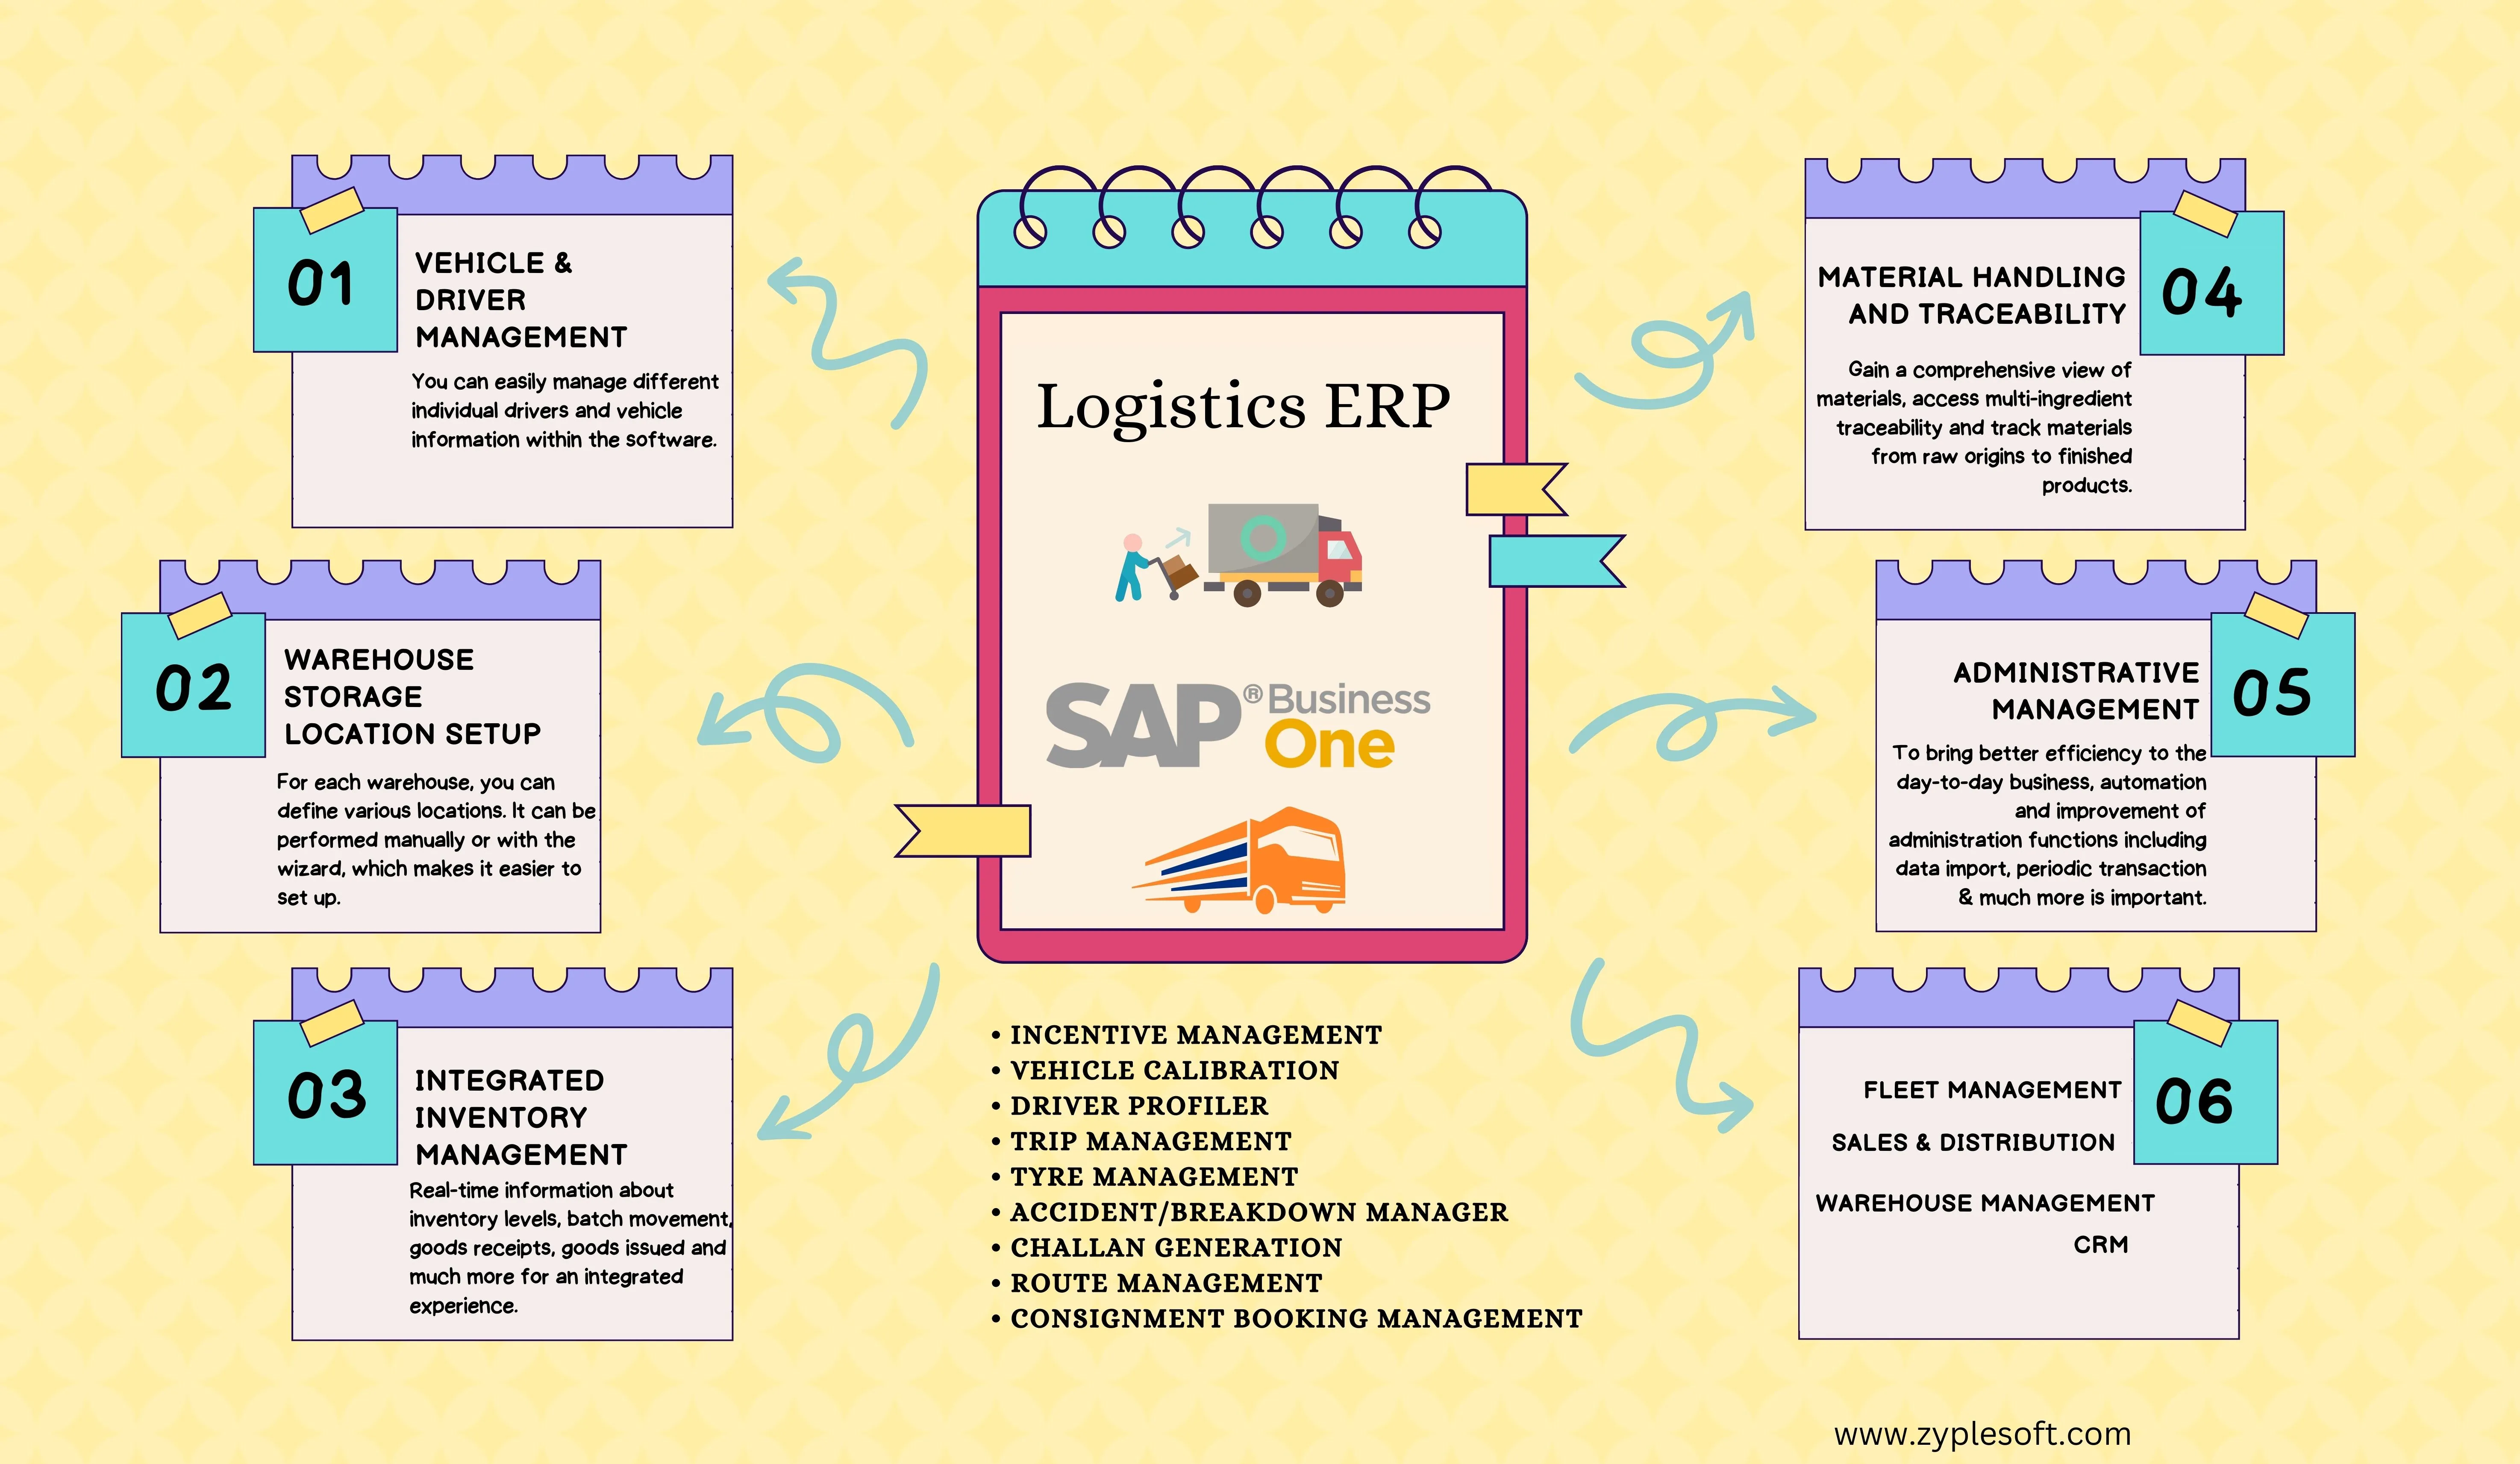 SAP Business One ERP for Logistics industry